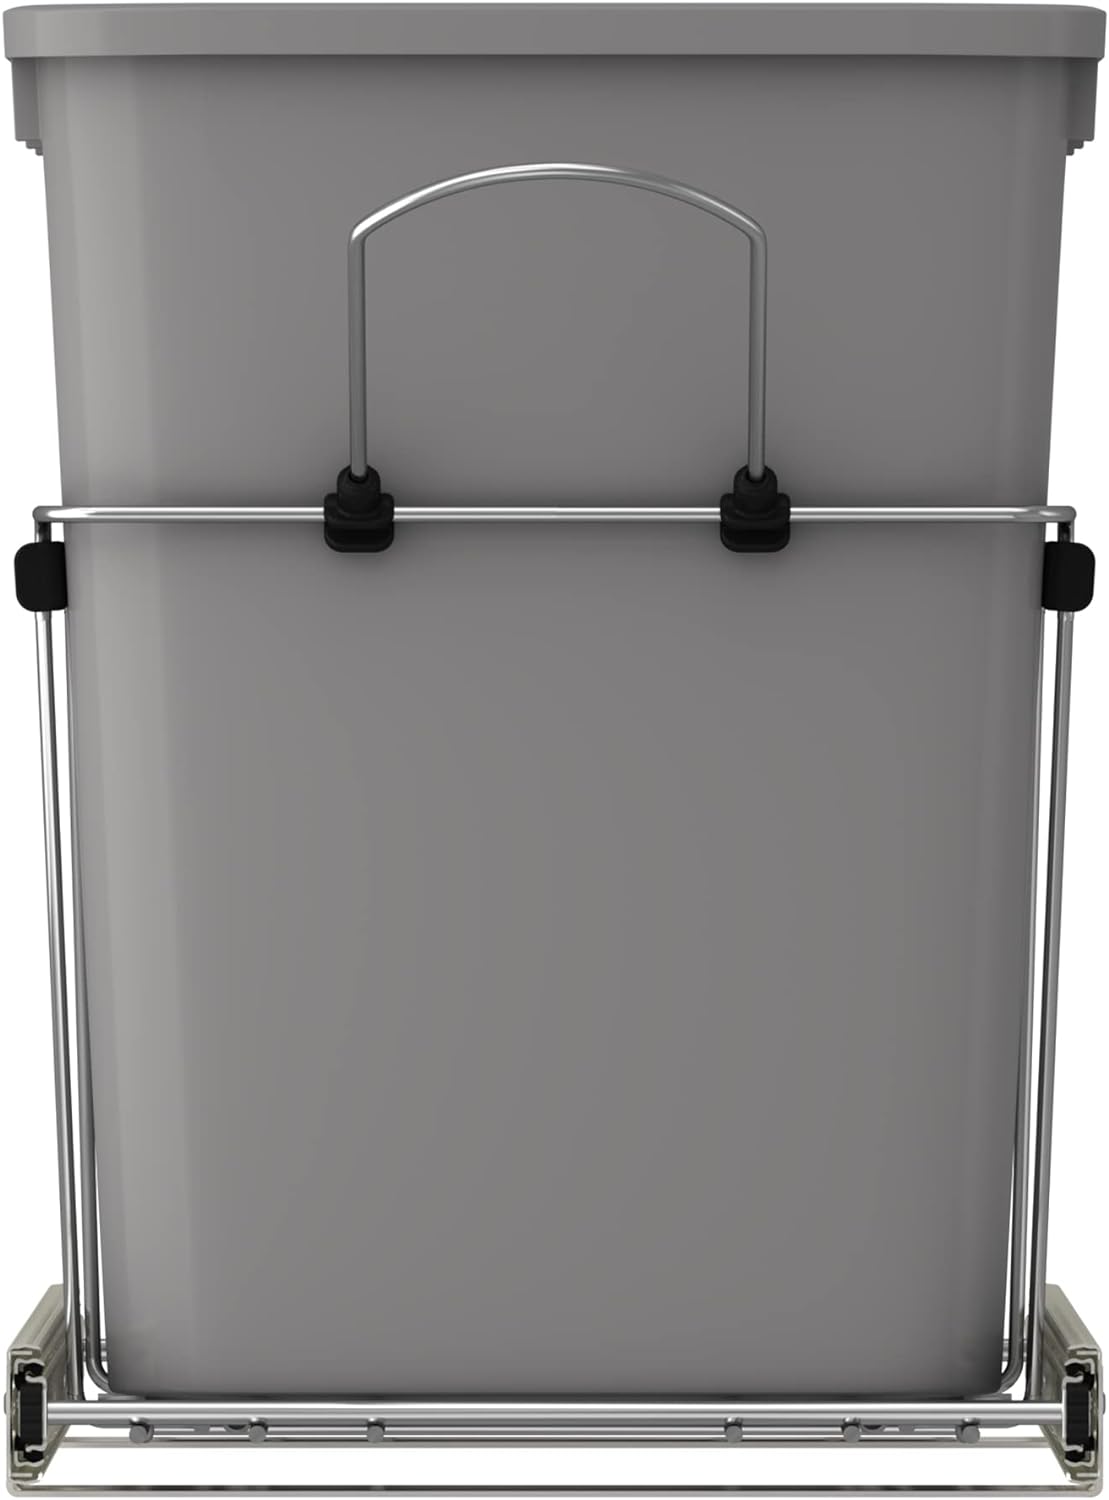 https://bigbigmart.com/wp-content/uploads/2023/10/Rev-A-Shelf-Double-Pull-Out-Trash-Can-for-Under-Kitchen-Cabinets-35-Qt-12-Gal-Garbage-Recyling-Bin-on-Full-Extension-Slides-Silver-RV-18KD-17C-S7.jpg